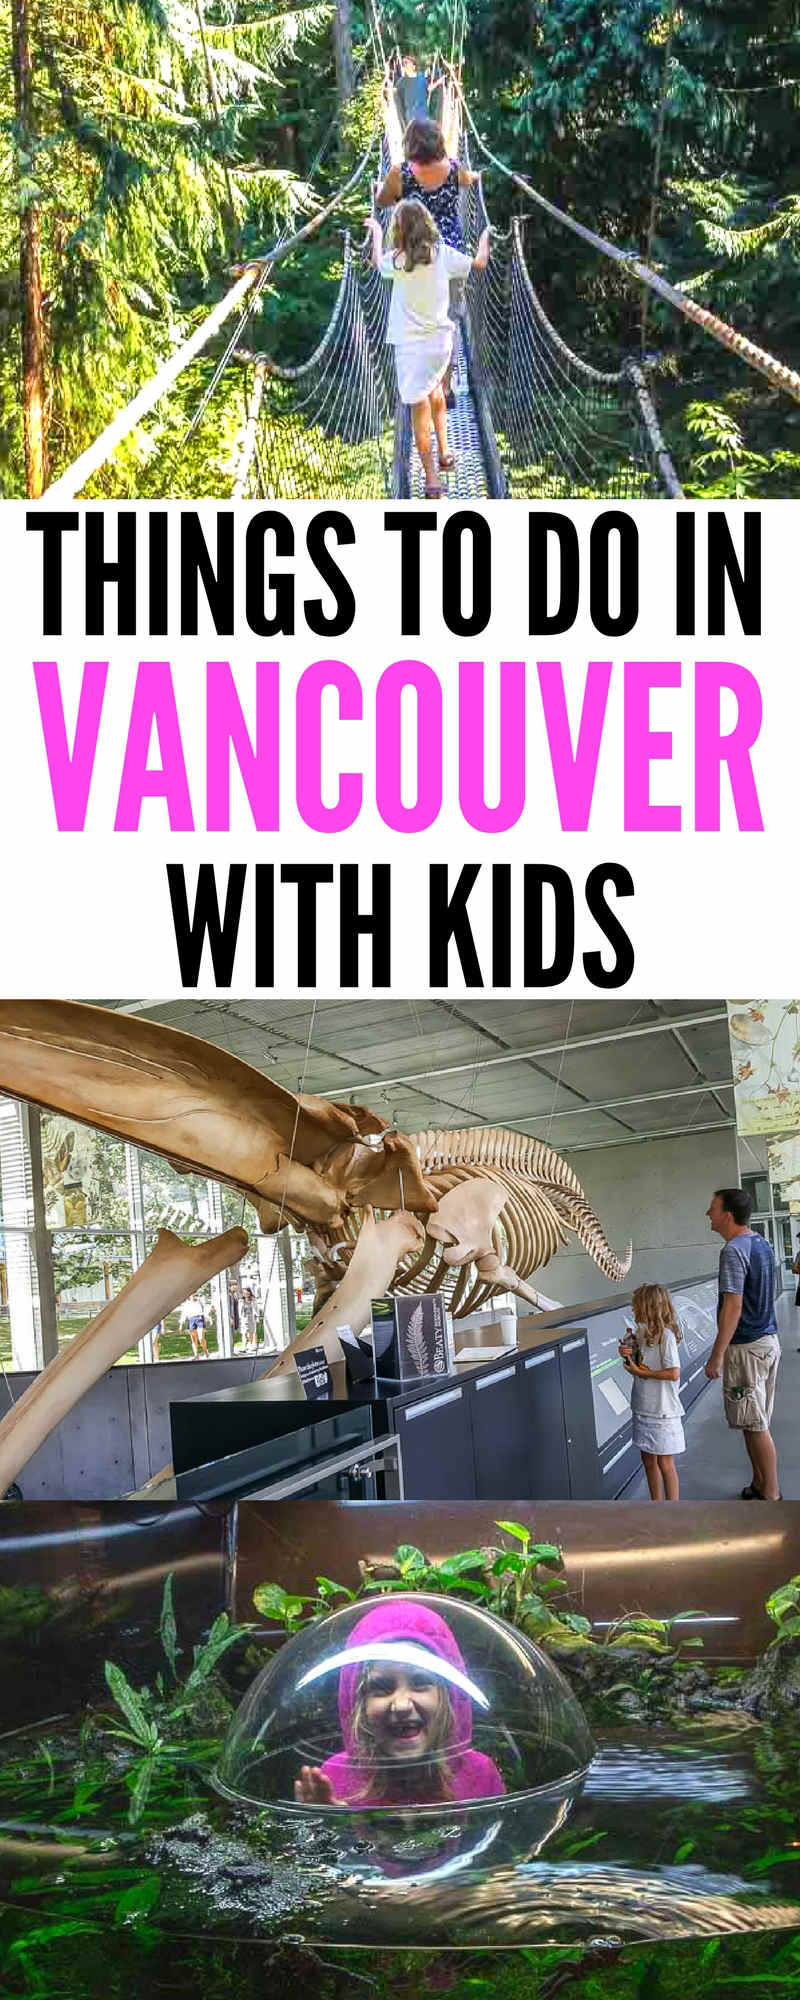 Things To Do In Vancouver With Kids